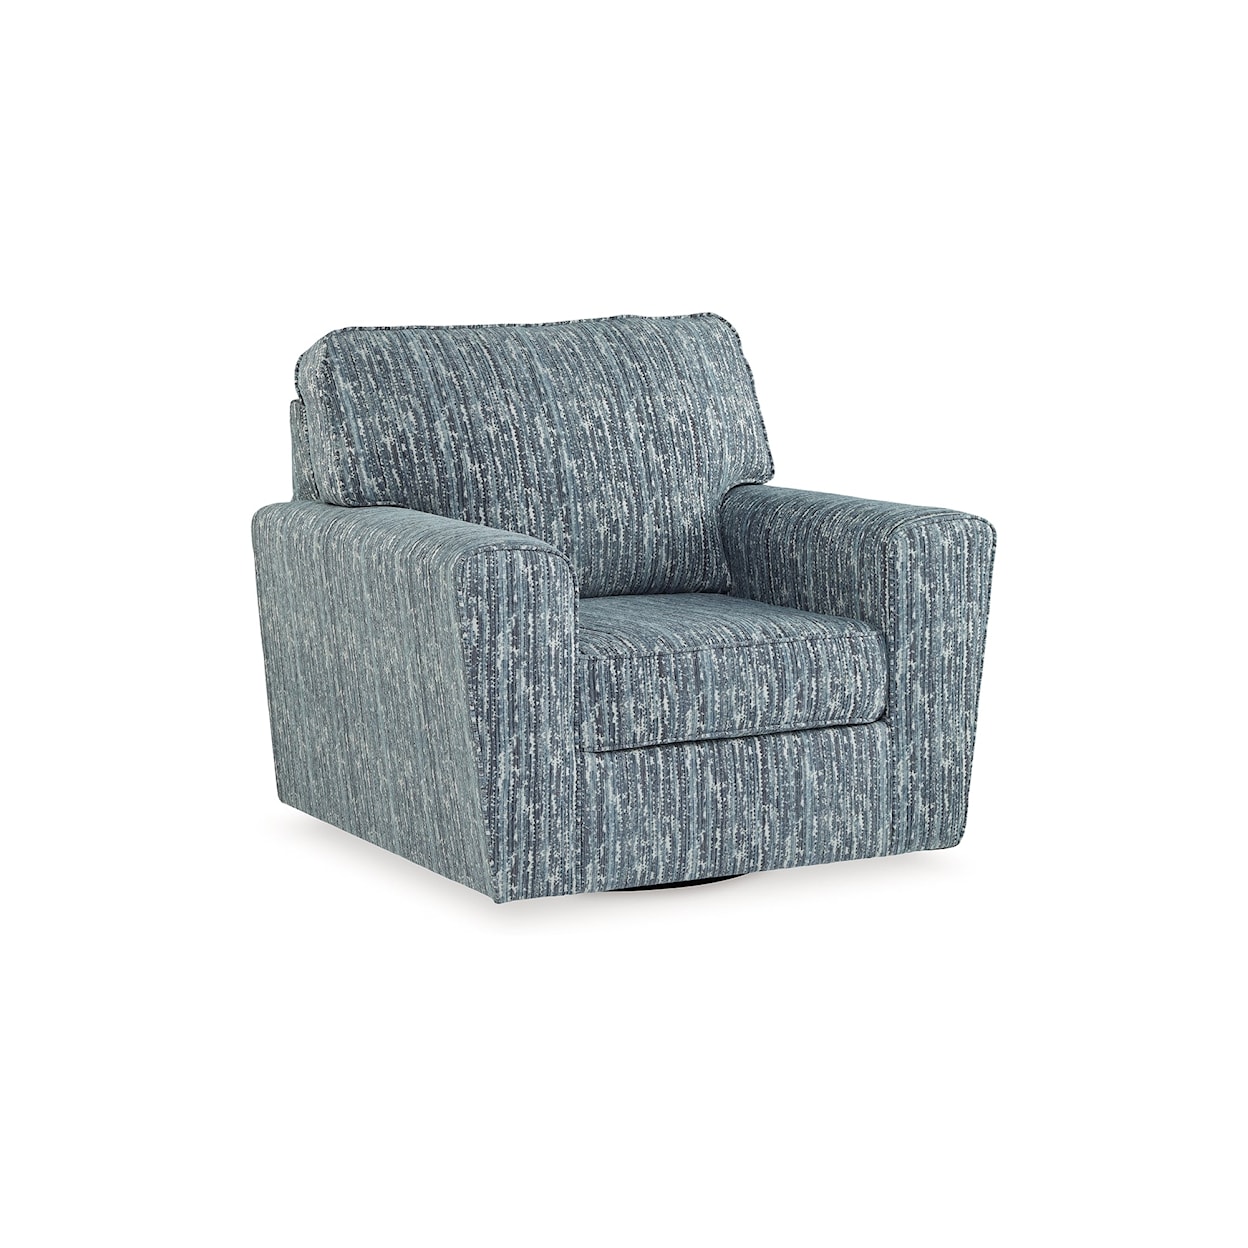 Signature Design by Ashley Aterburm Swivel Accent Chair